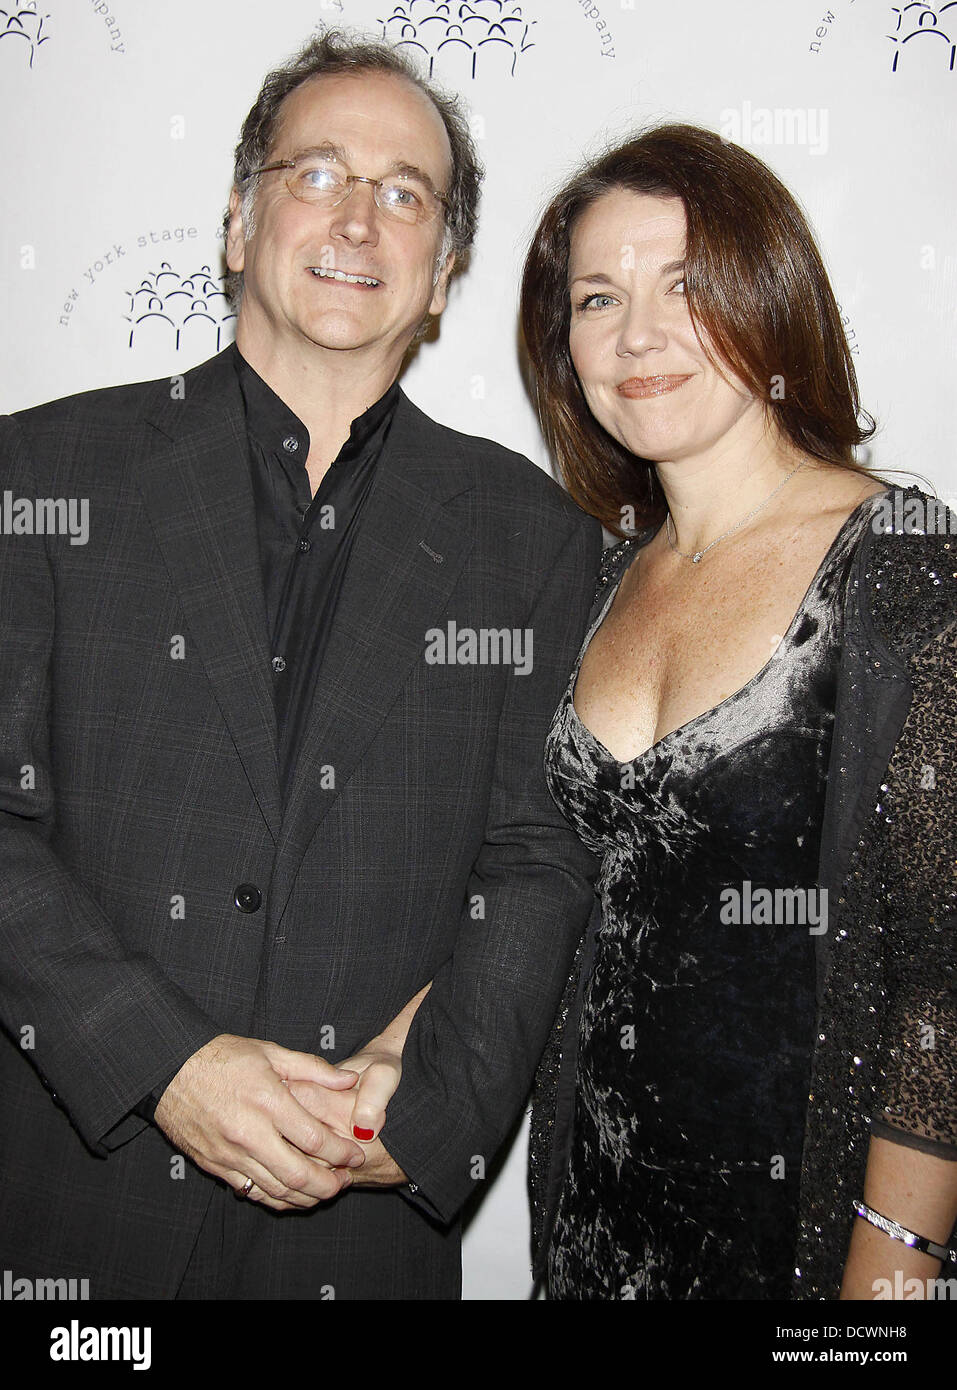 Mark Linn-Baker and Adrianne Lobel  The 2011 New York Stage and Film Winter Gala held at The Plaza Hotel - Arrivals.  New York City, USA - 04.12.11 Stock Photo